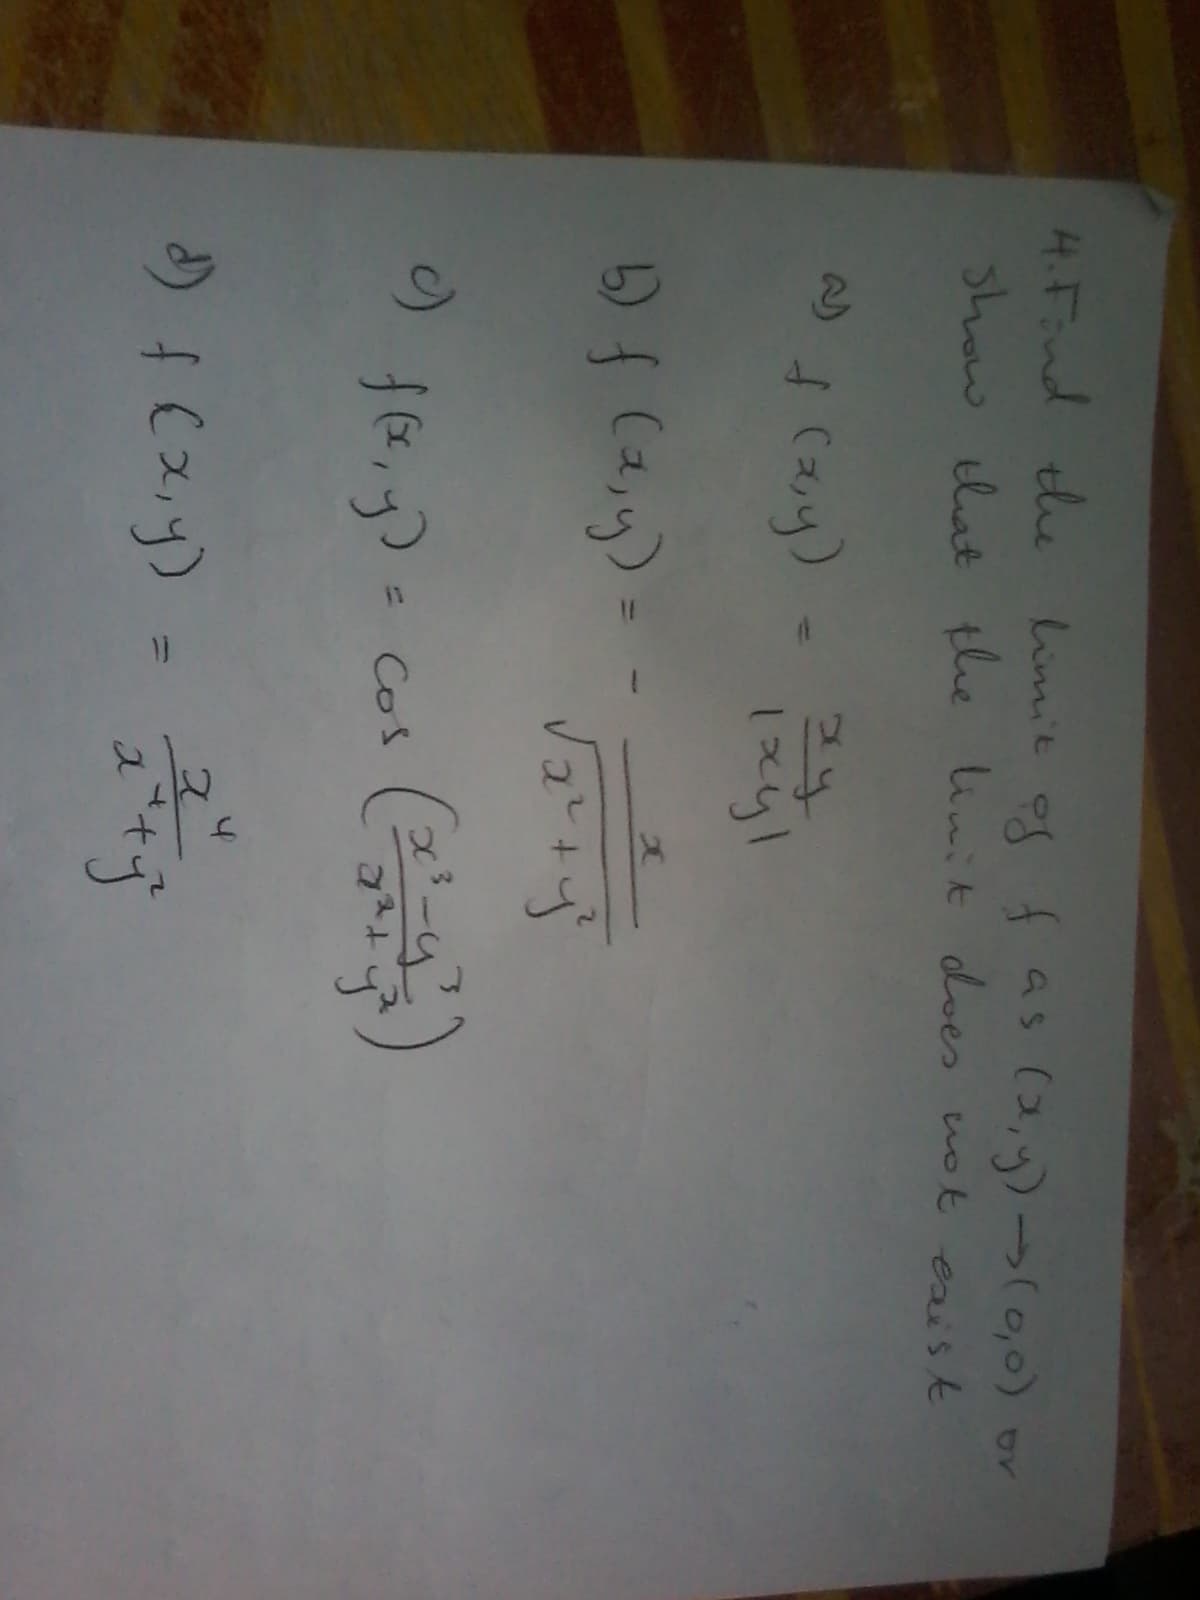 4.Fnd the Limit of fas
show hat the init does
(2)
6) f (a,y)=
)= Cos
